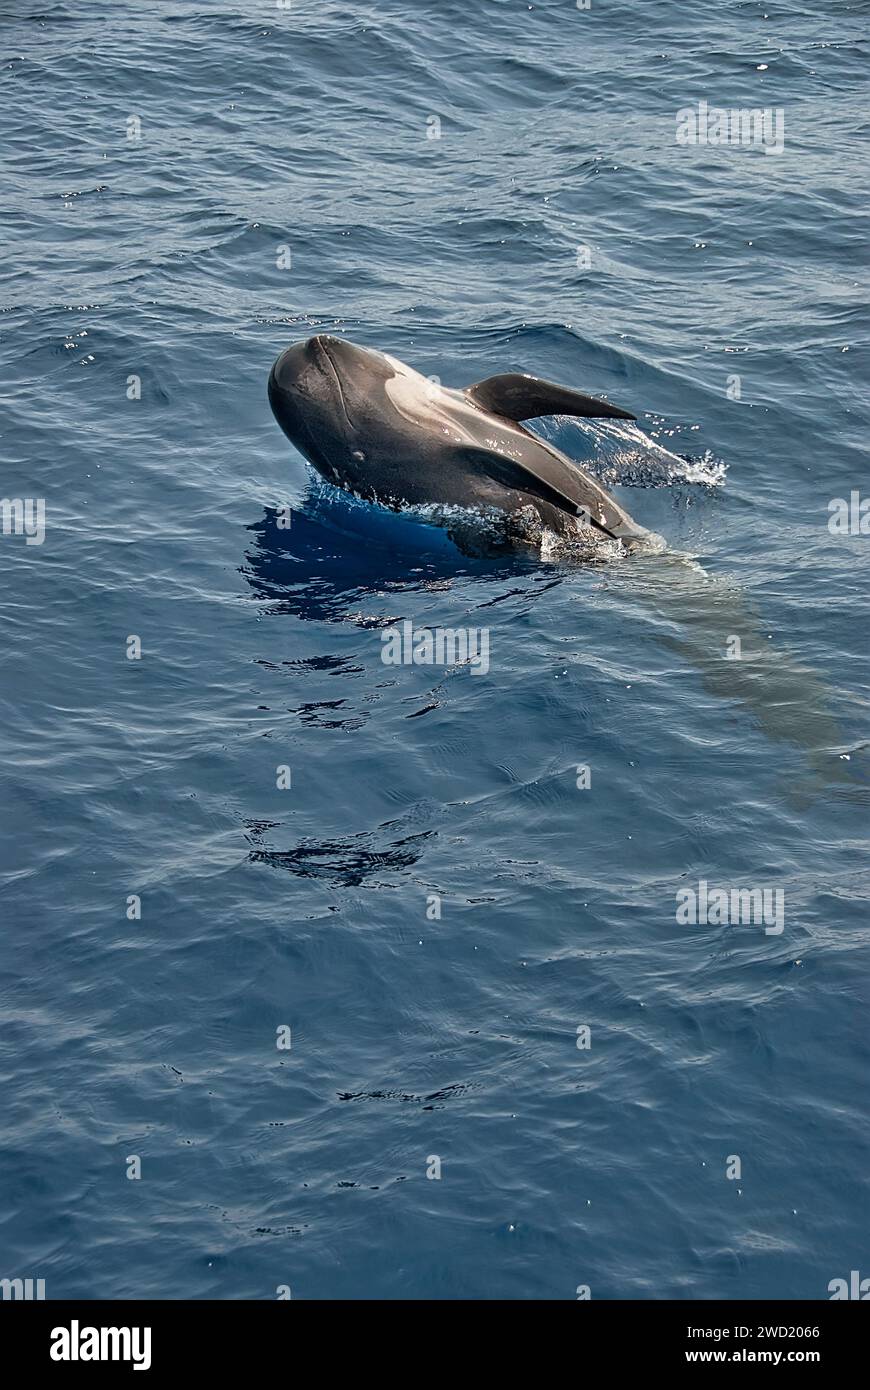 A pilot whale (Globicephala melas) breaching the surface of the ocean. The whale is captured mid-jump, with its body partially above the water Stock Photo